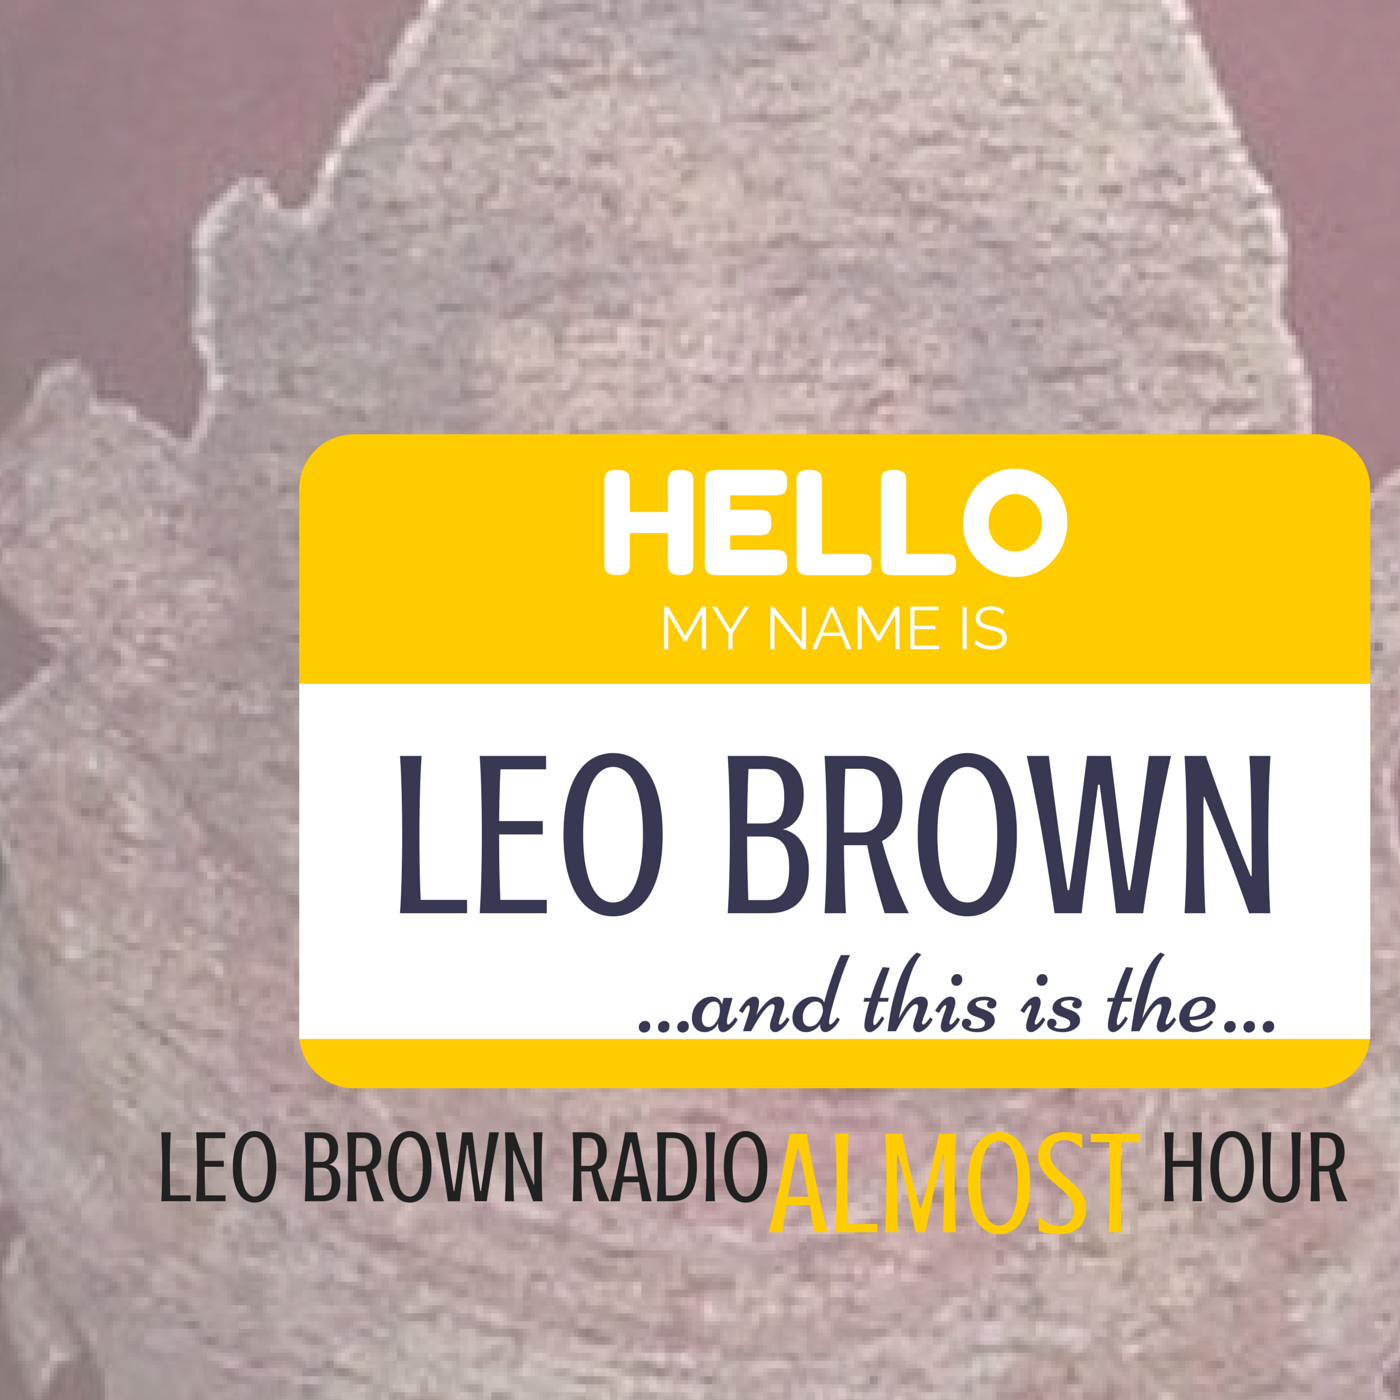 Leo Brown Almost Hour 02/27/17